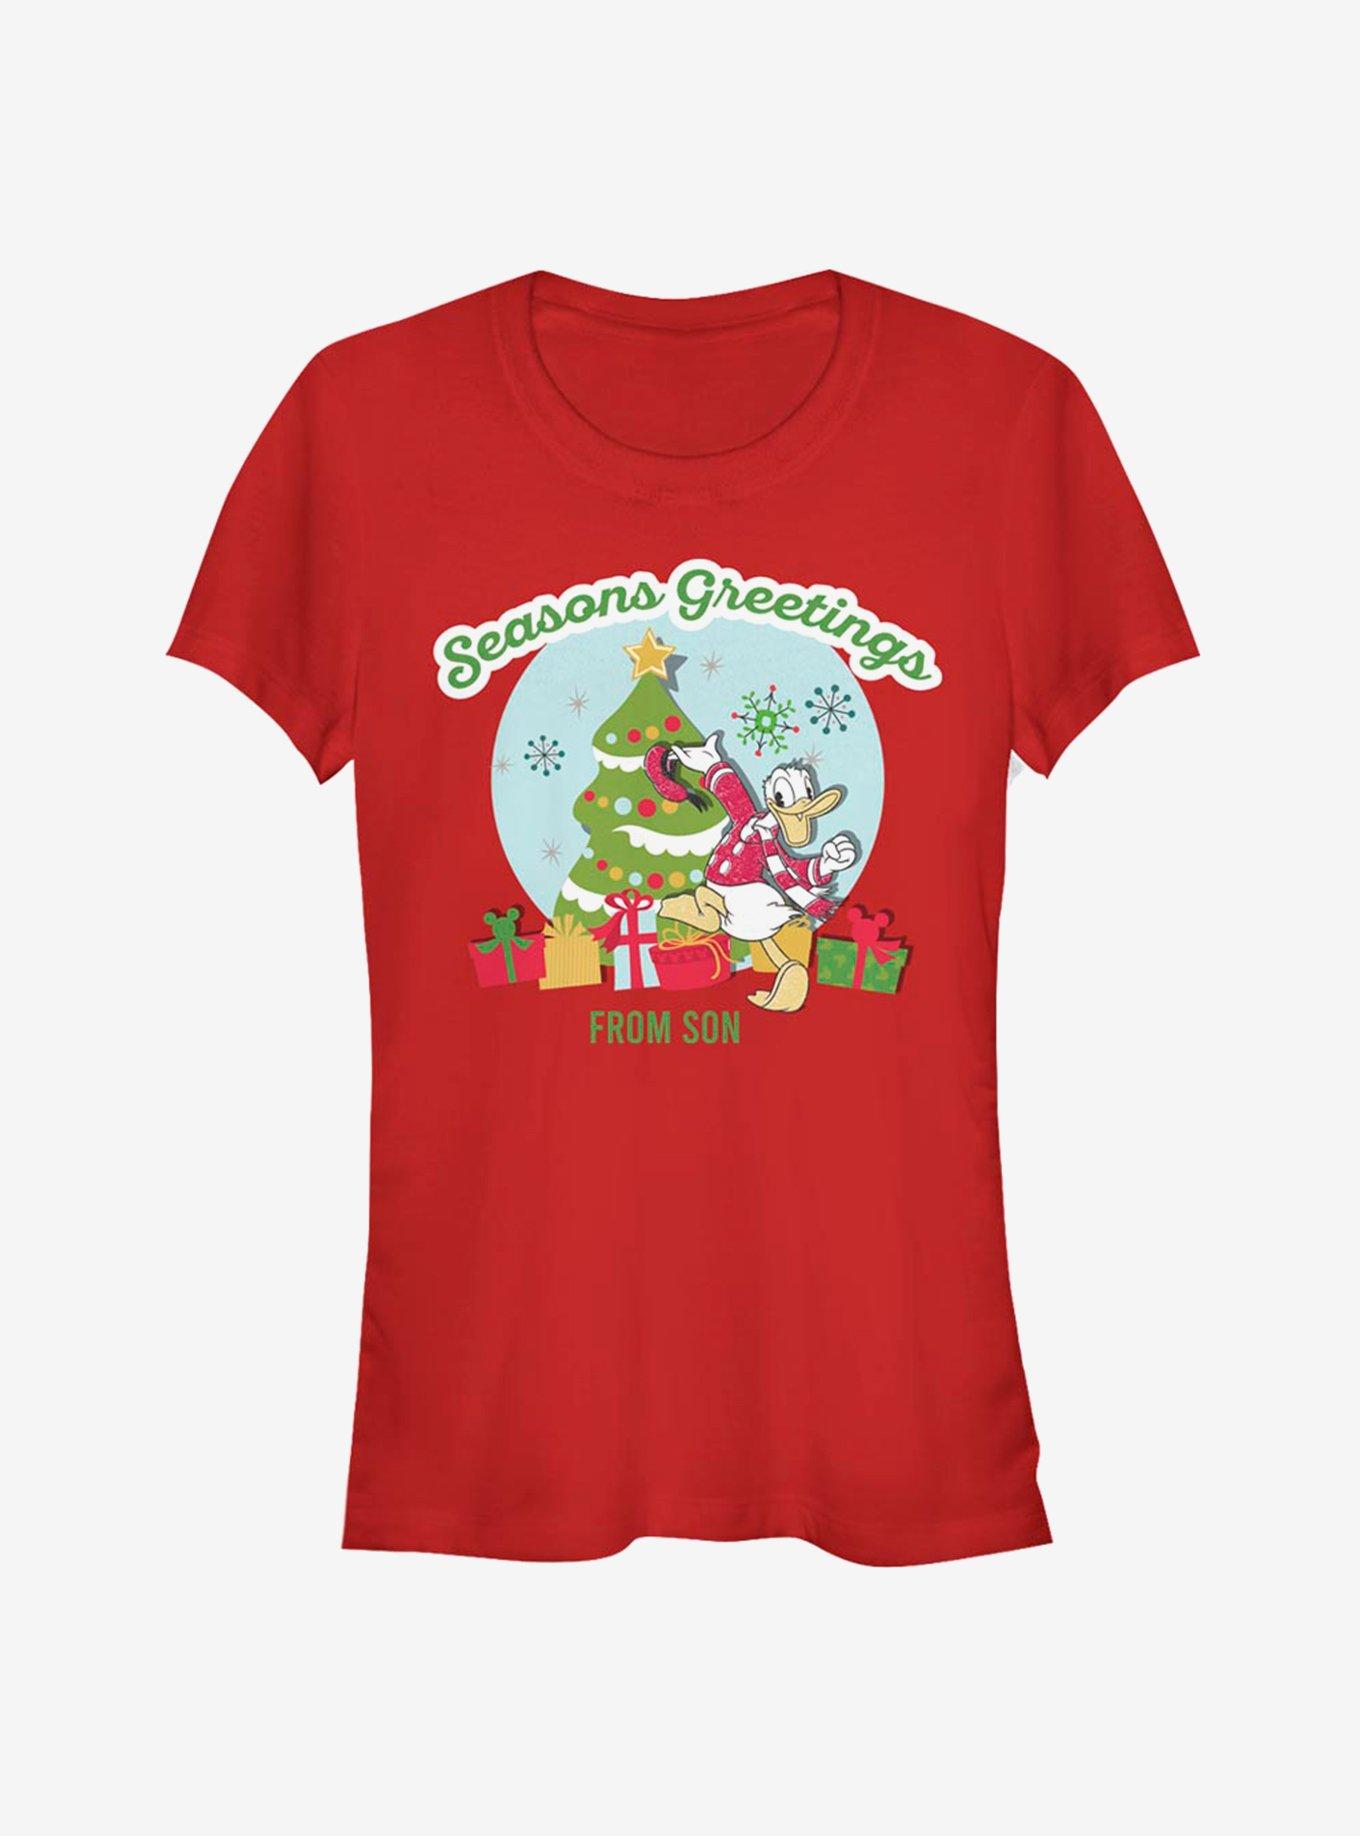 Disney Donald Duck Holiday Seasons Greetings From Son Classic Girls T-Shirt, RED, hi-res